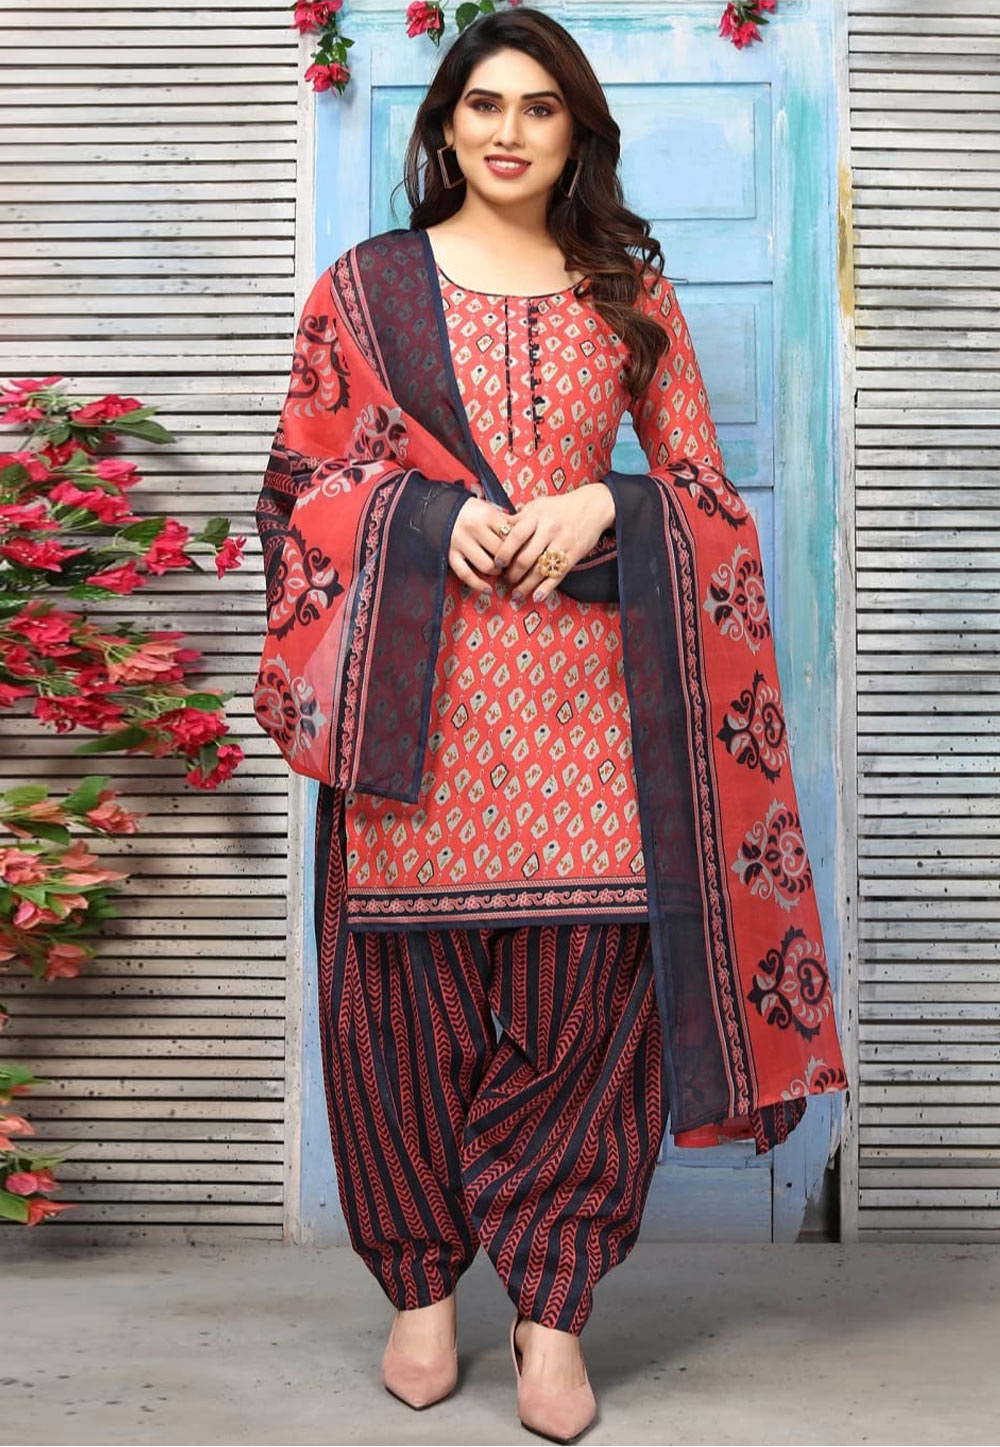 Salwar suit with Back Neck Pattern55 Different Designs Of Salwar Suits For  Women That Are Absolutely   Indian designer outfits Kurti neck designs  Kurta designs